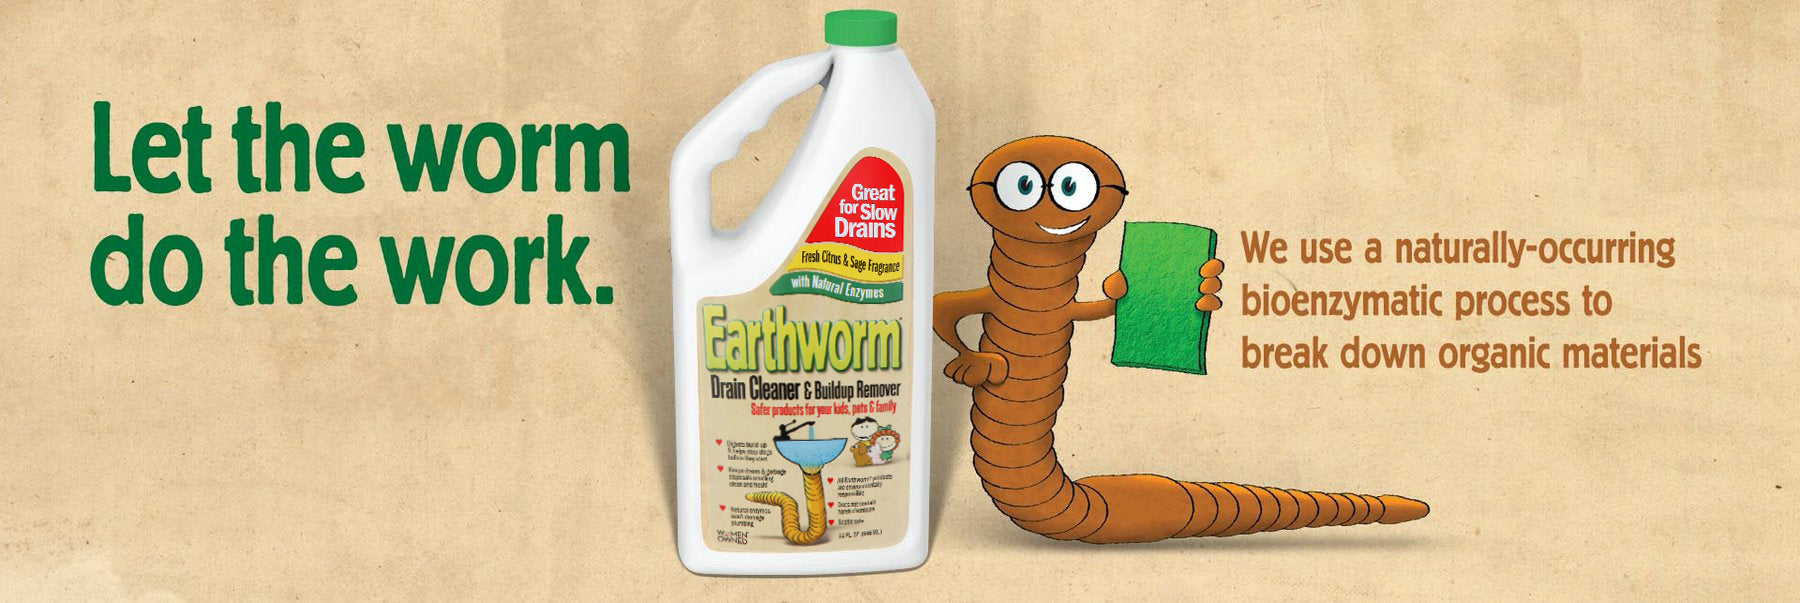 Earthworm® Carpet & Upholstery Cleaner – Earthworm - Clean Earth